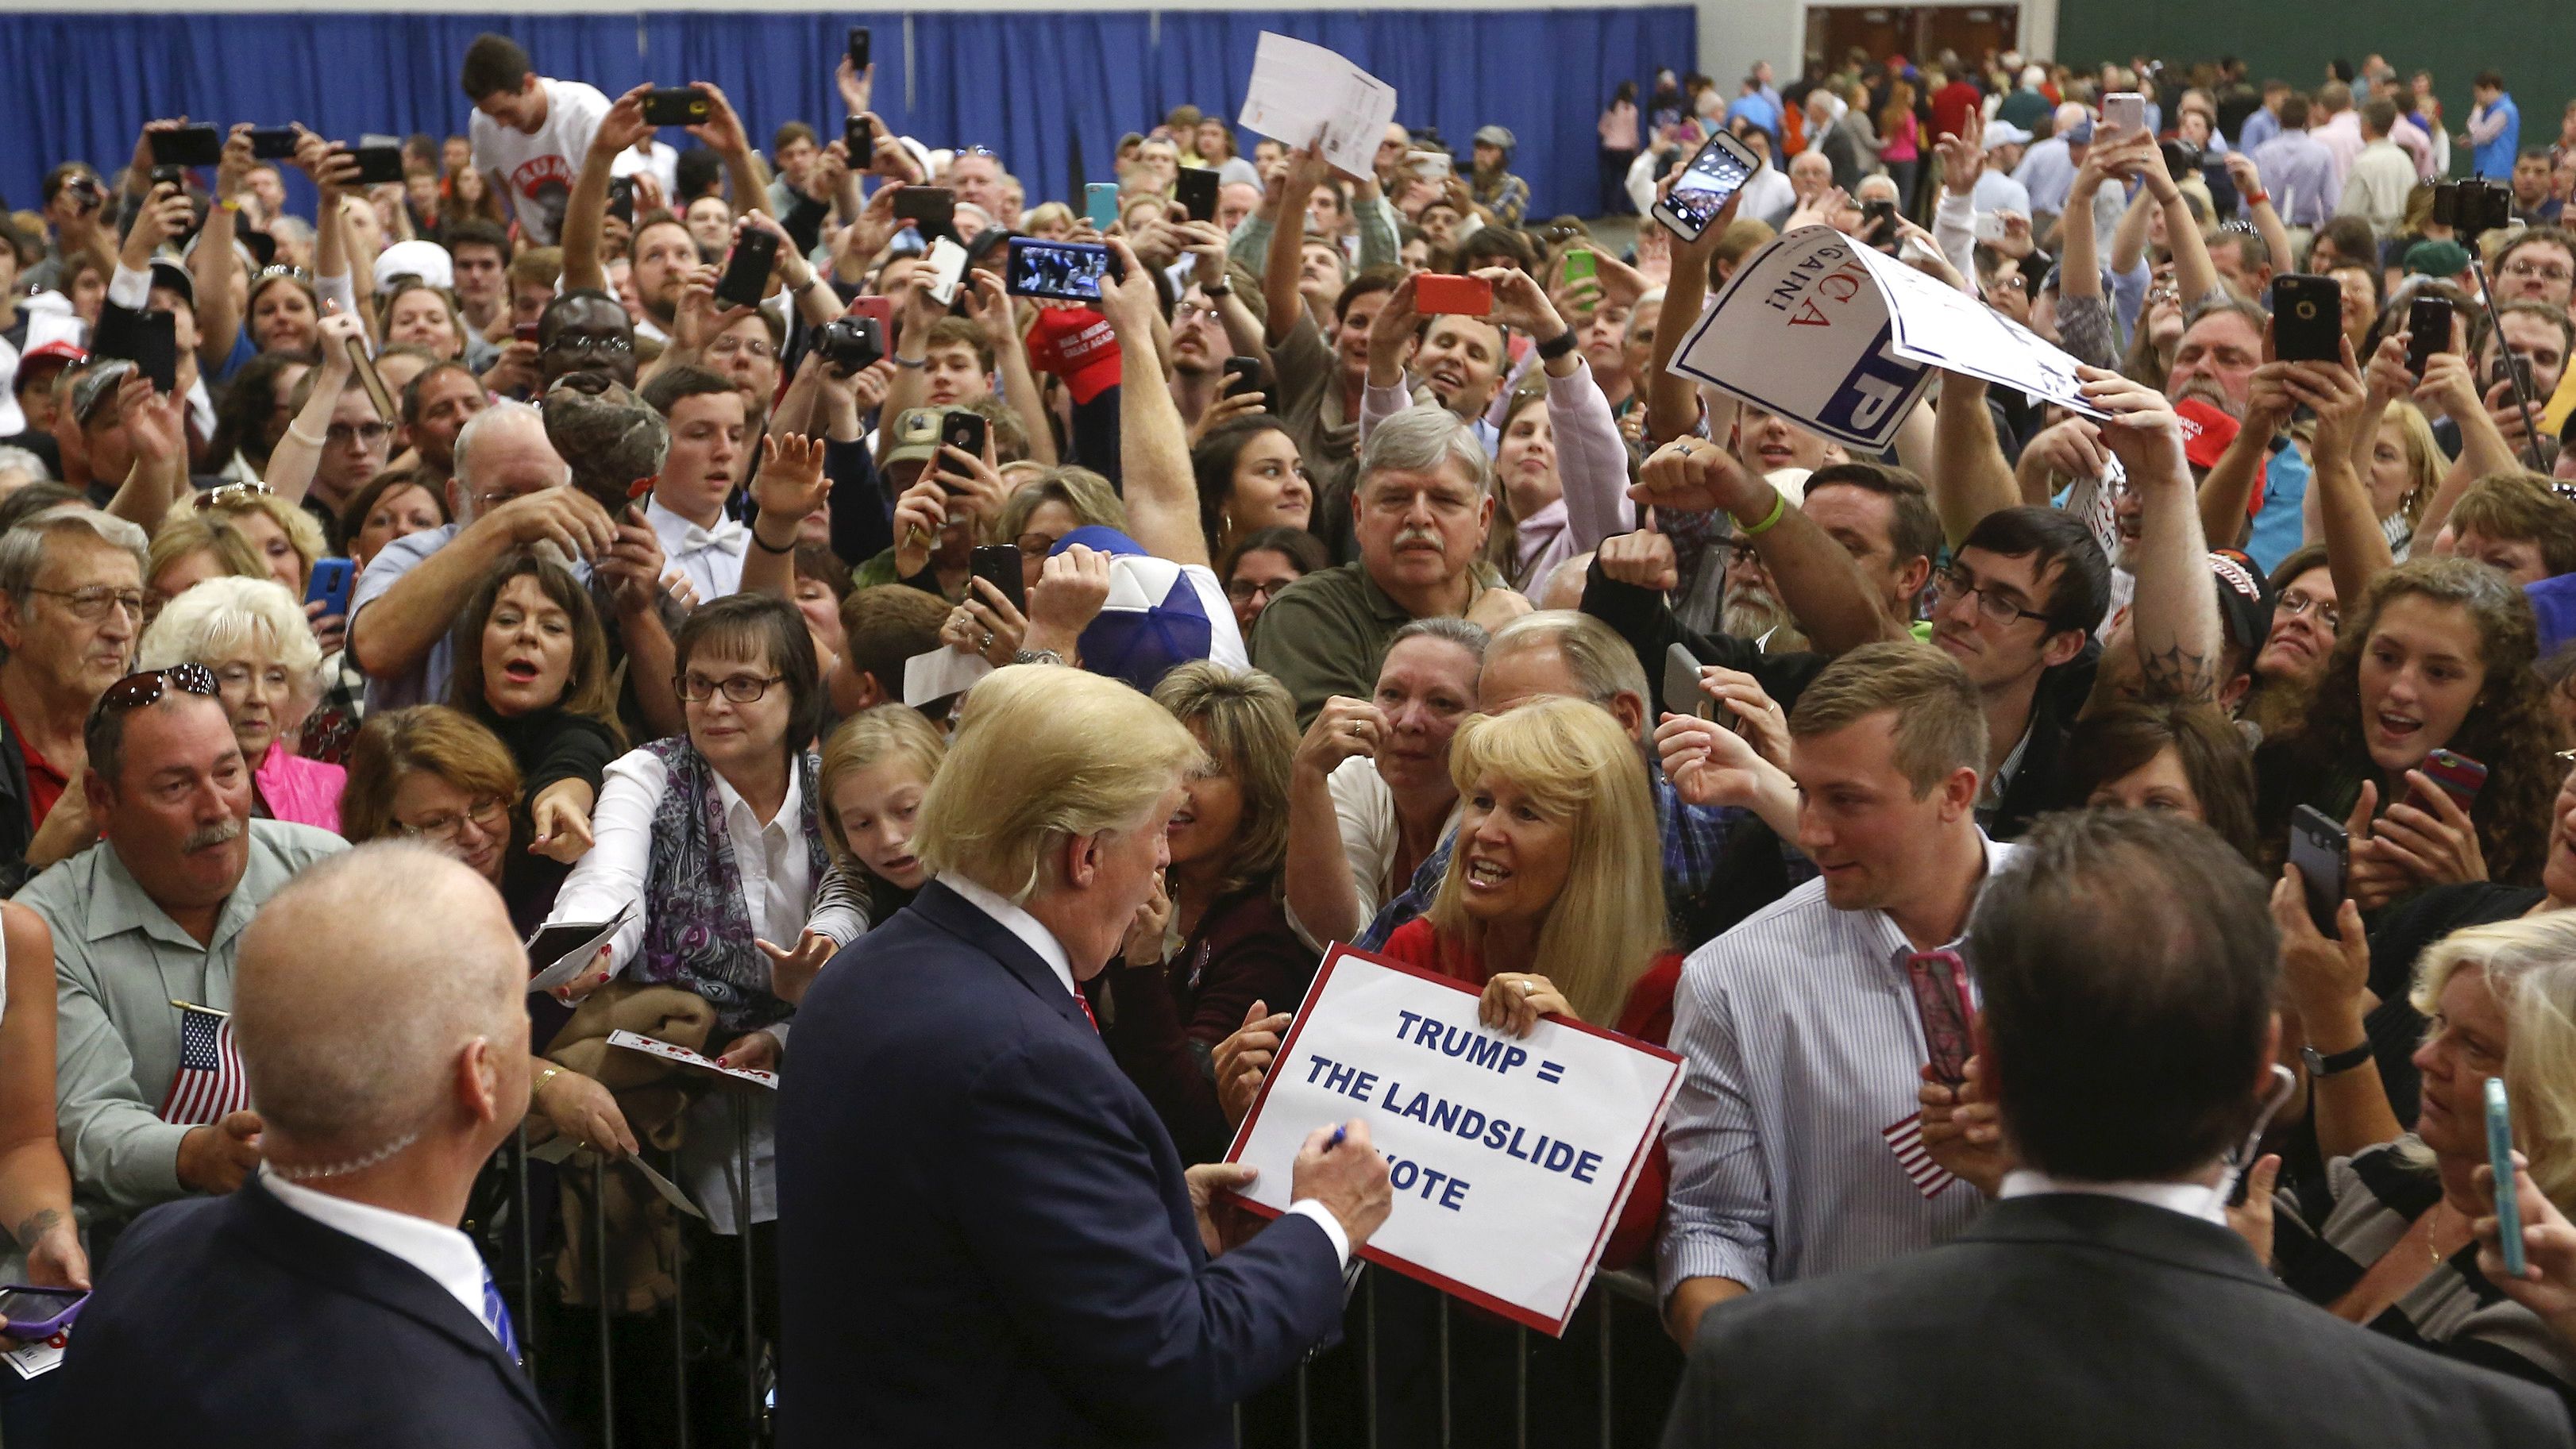 "Trump = The Landslide Vote," reads a sign at a rally in Anderson, South Carolina.